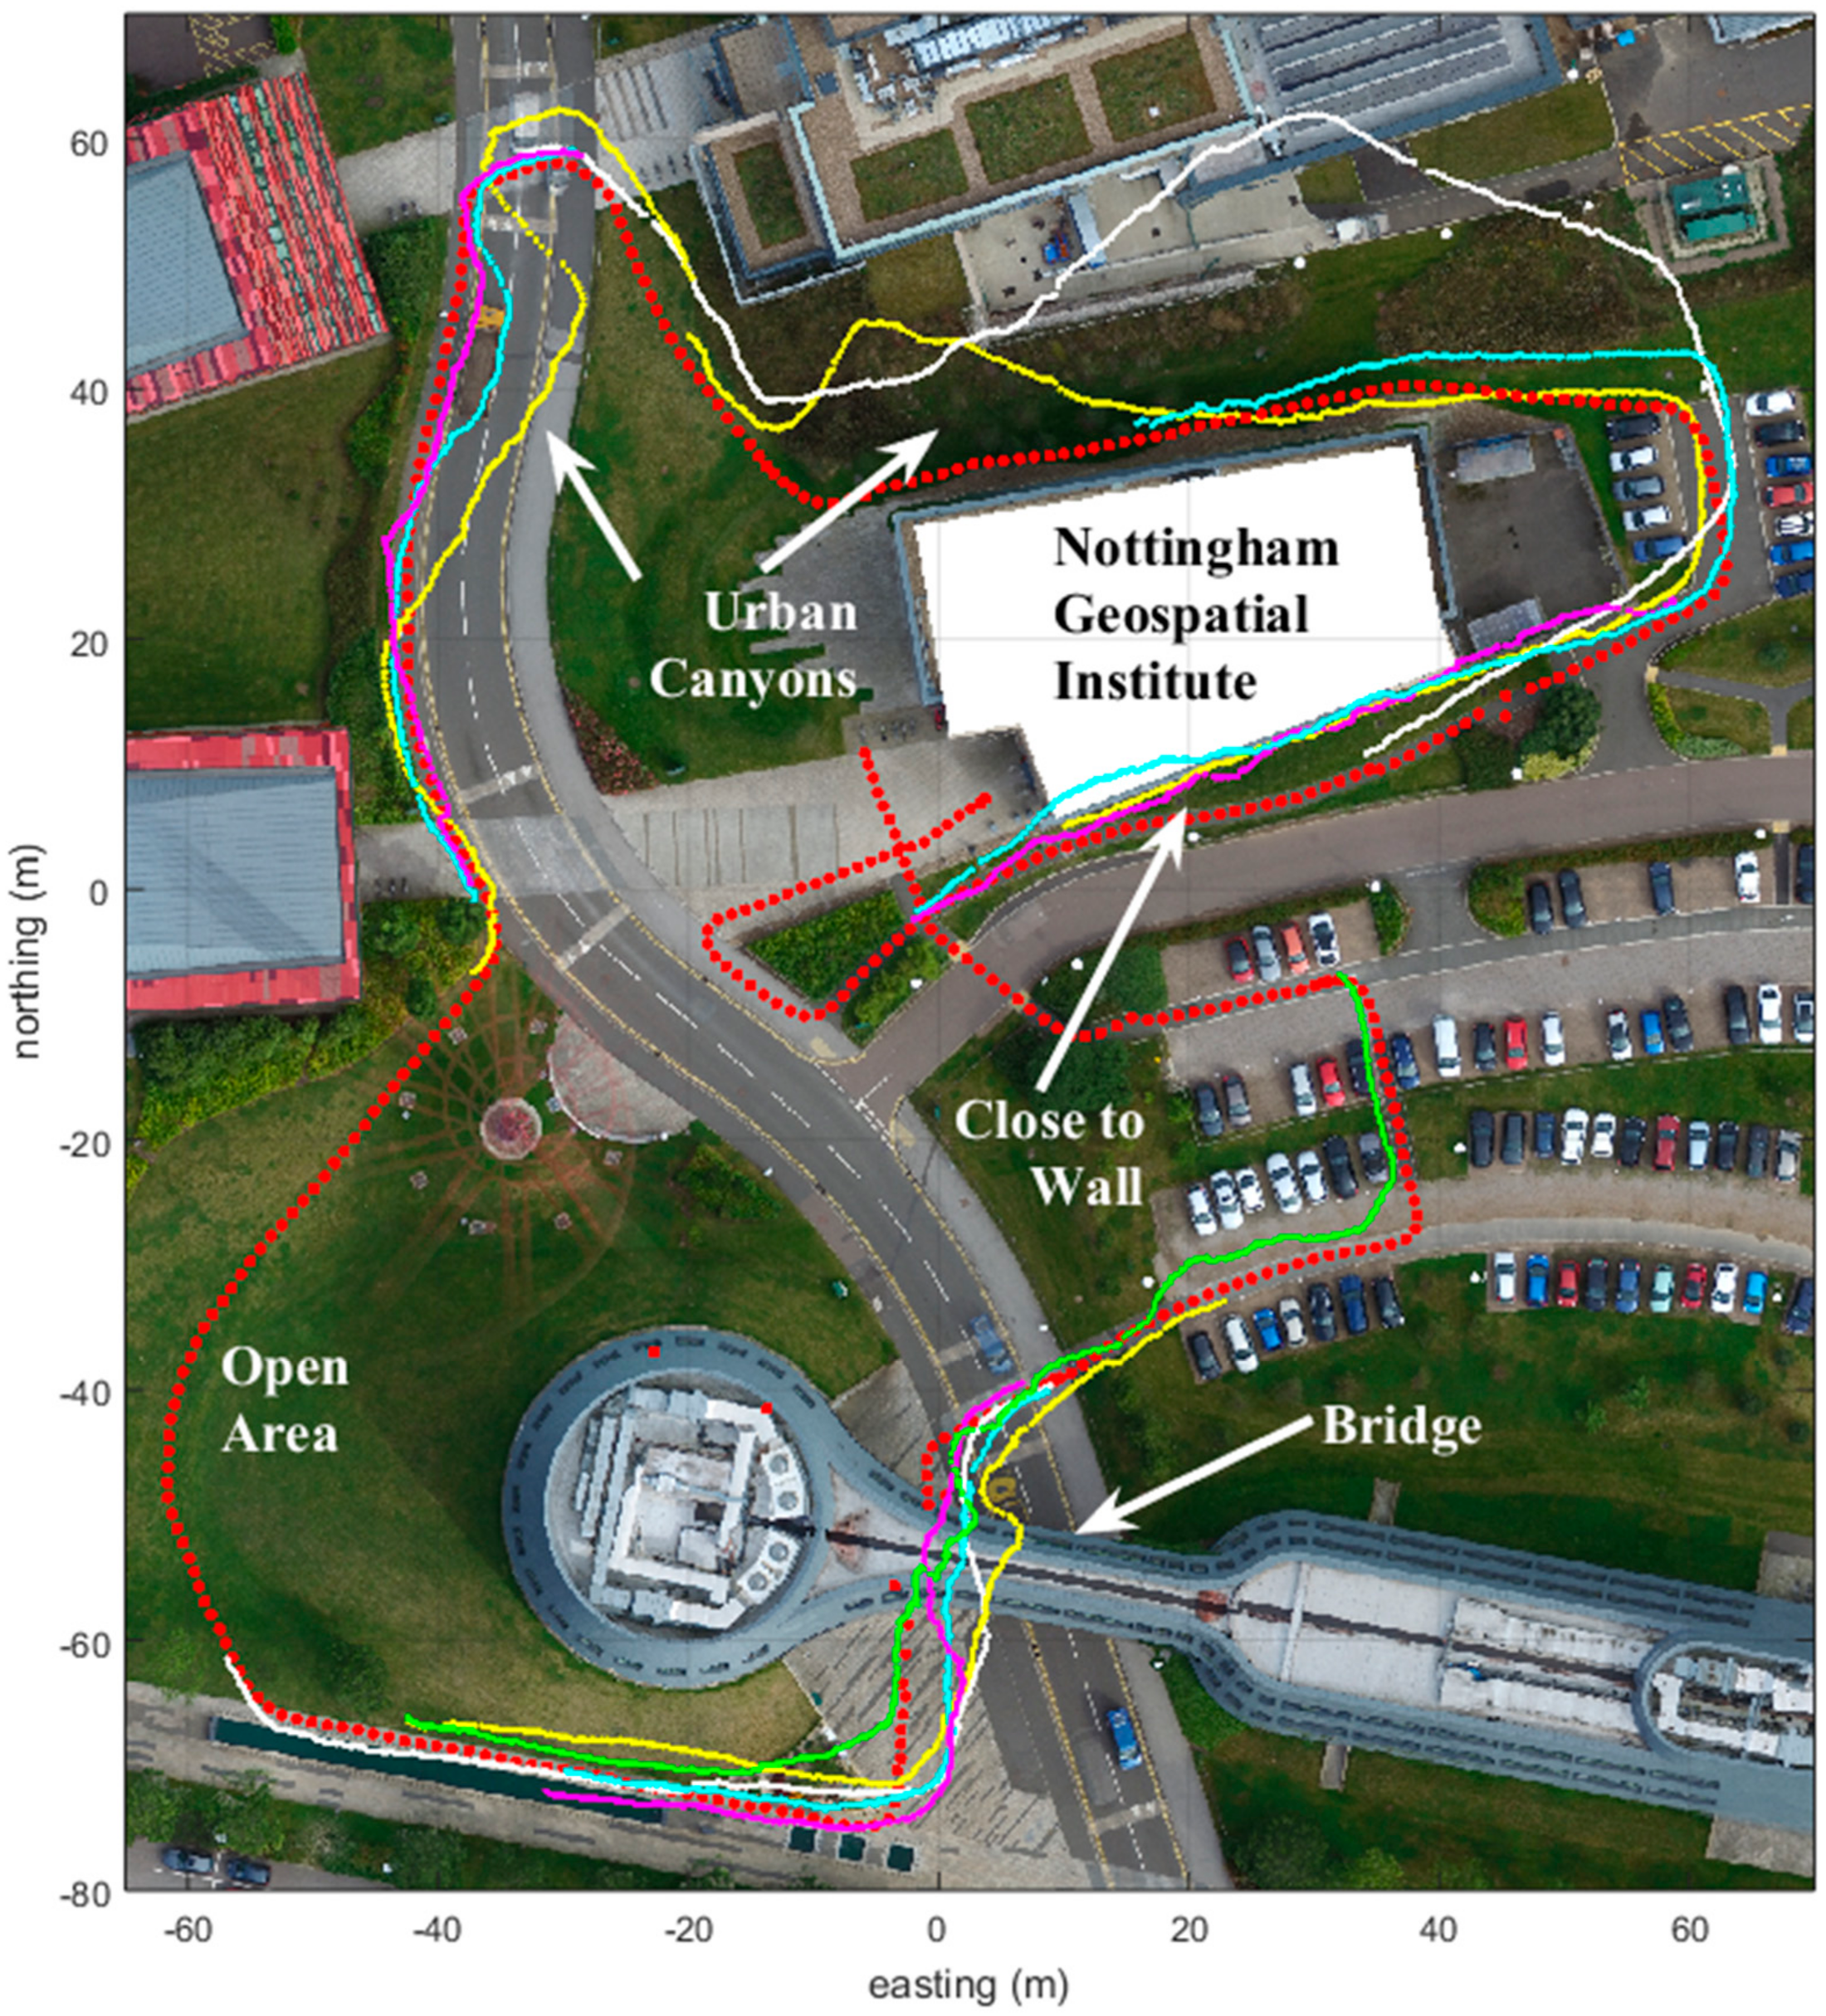 Sensors Free Full Text Gnss Trajectory Anomaly Detection Using Similarity Comparison Methods For Pedestrian Navigation Html